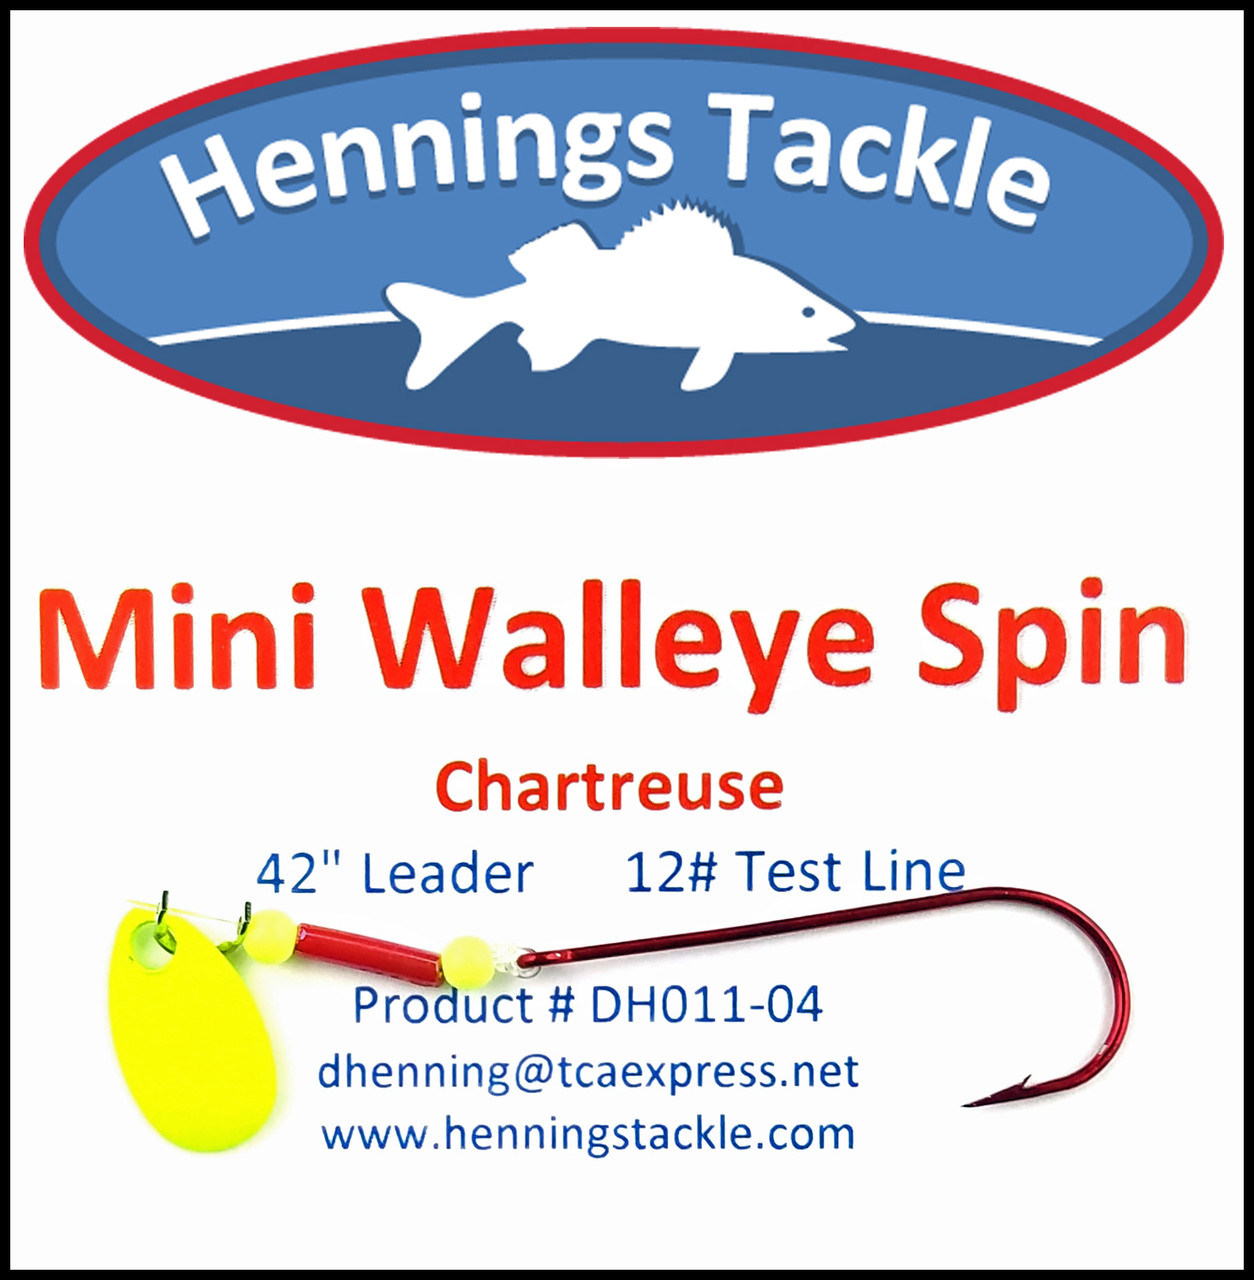 Mini Walleye Spin - Chartreuse - Henning's Tackle